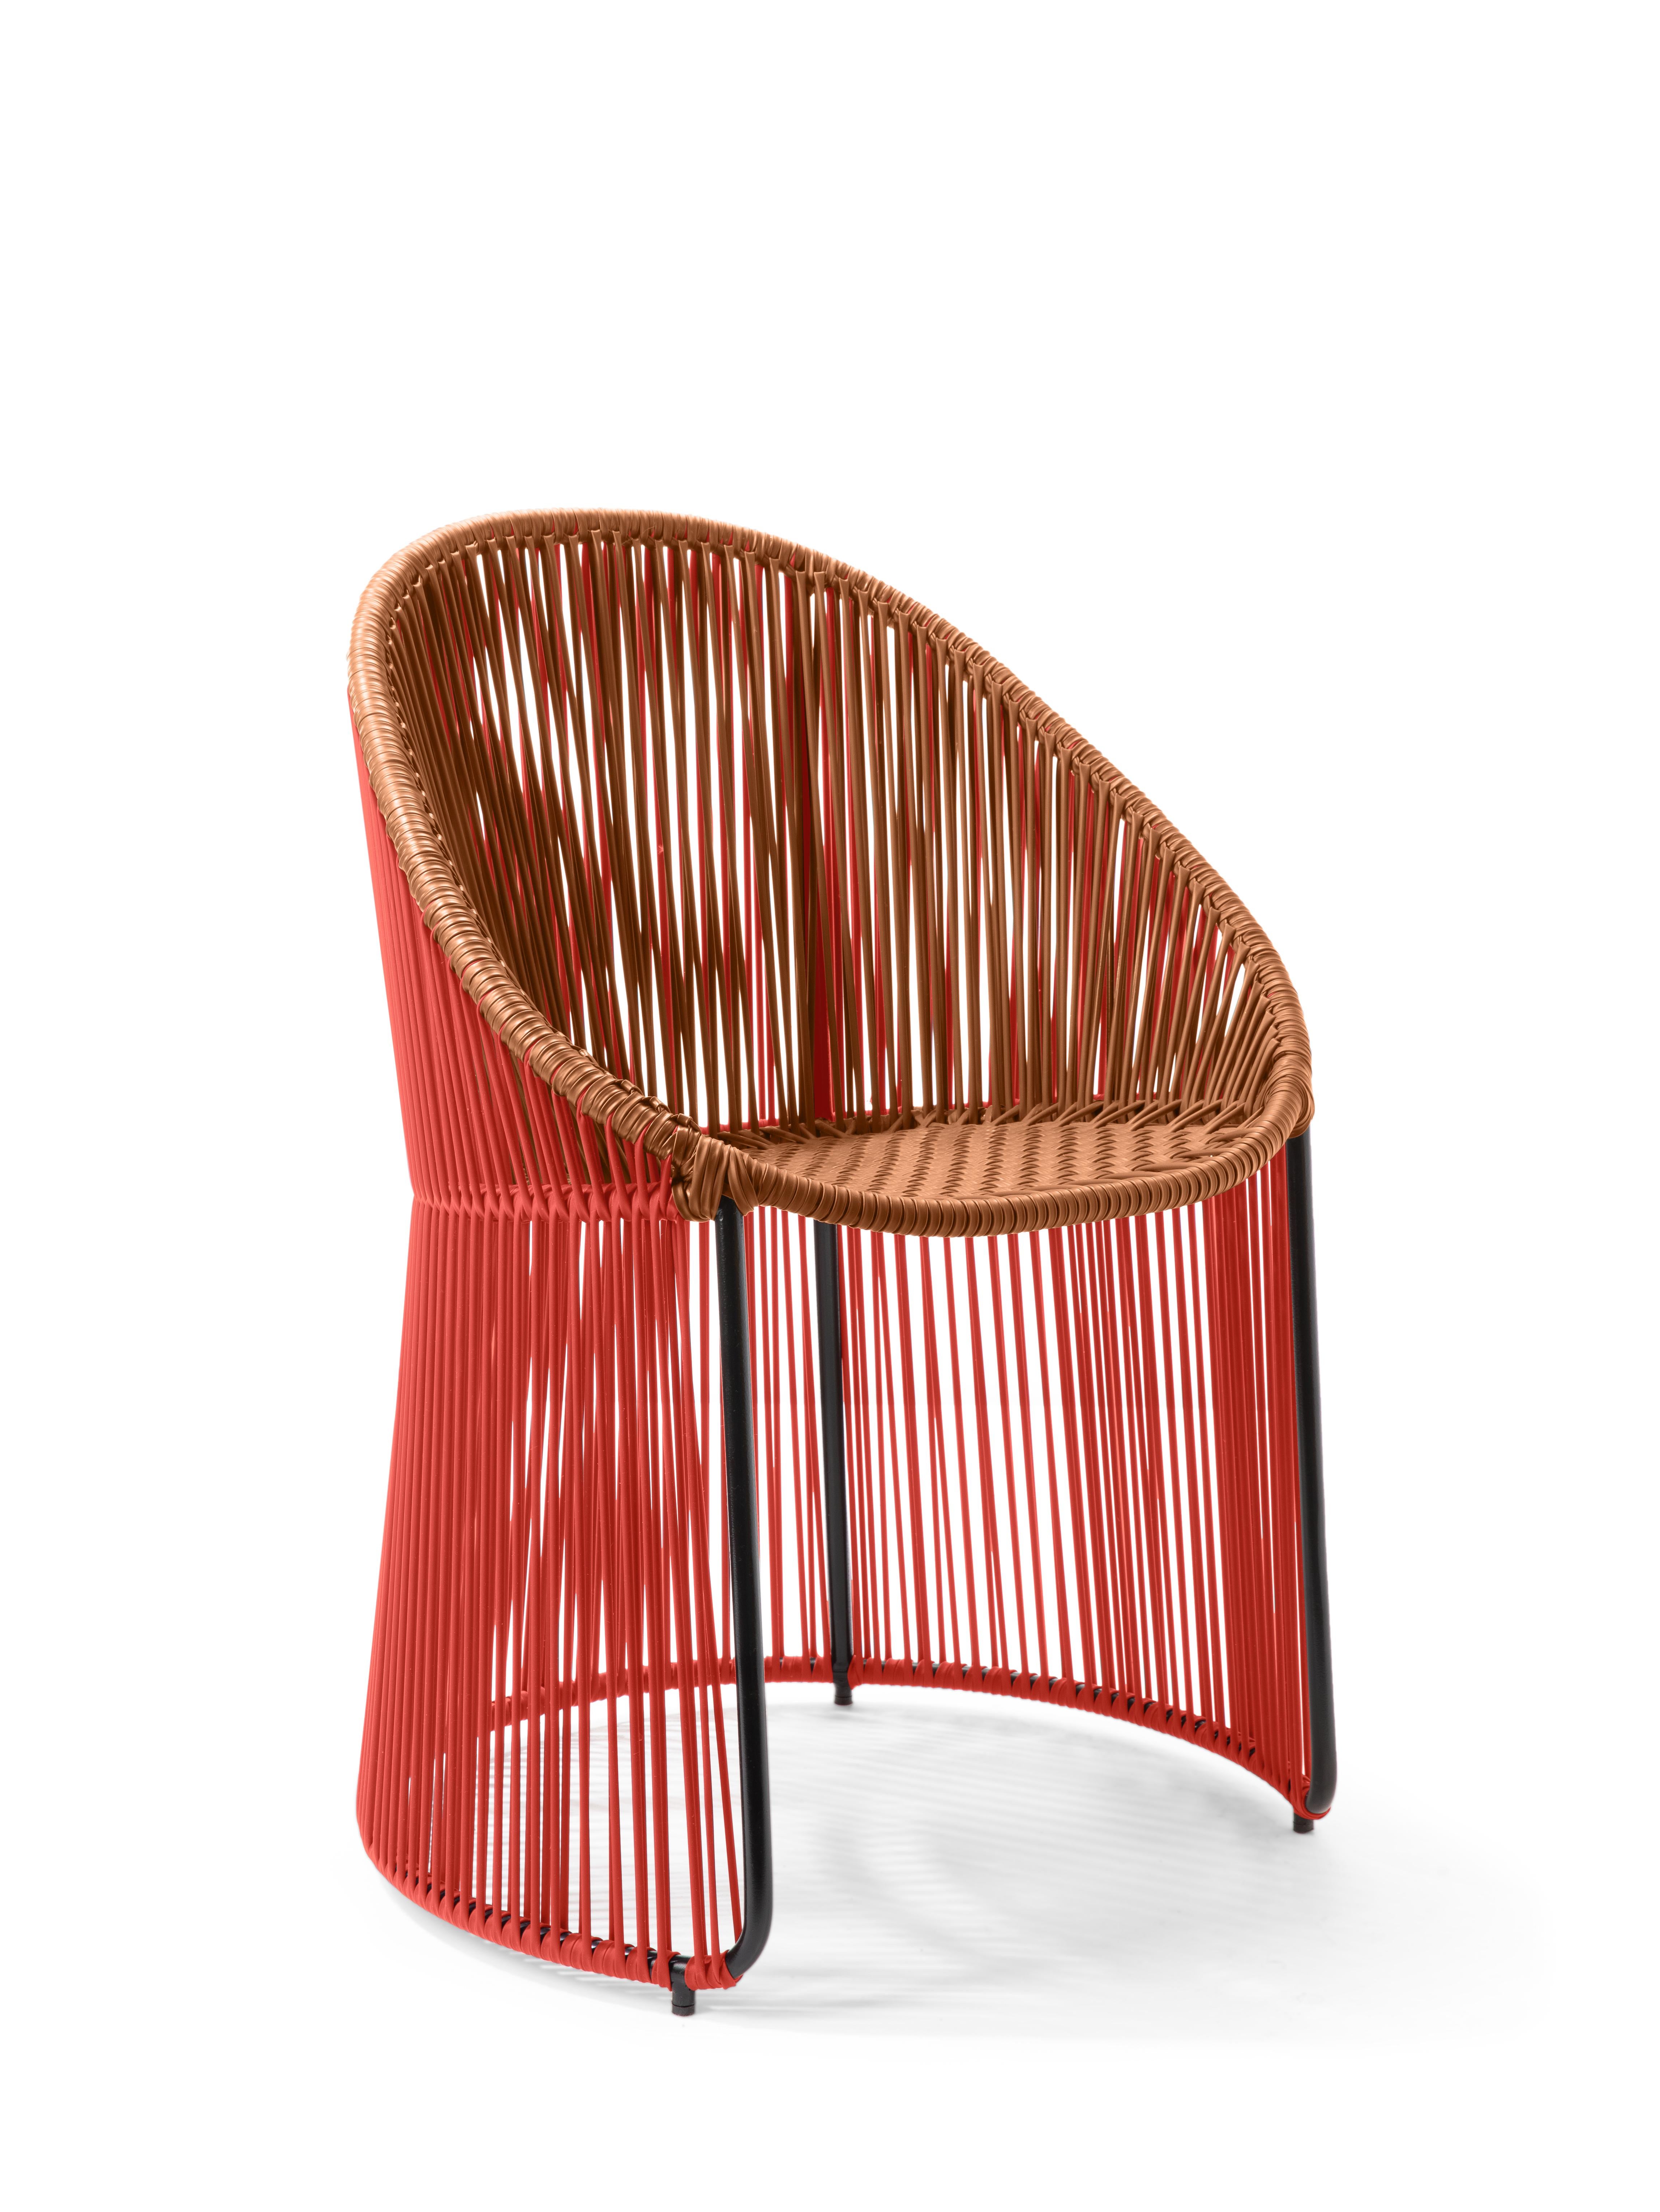 Coral/caramel cartagenas dining chair by Sebastian Herkner
Materials: PVC strings. Galvanized and powder-coated tubular steel frame
Technique: made from recycled plastic. Weaved by local craftspeople in Colombia. 
Dimensions: W 60.2 x D 53.8 x H